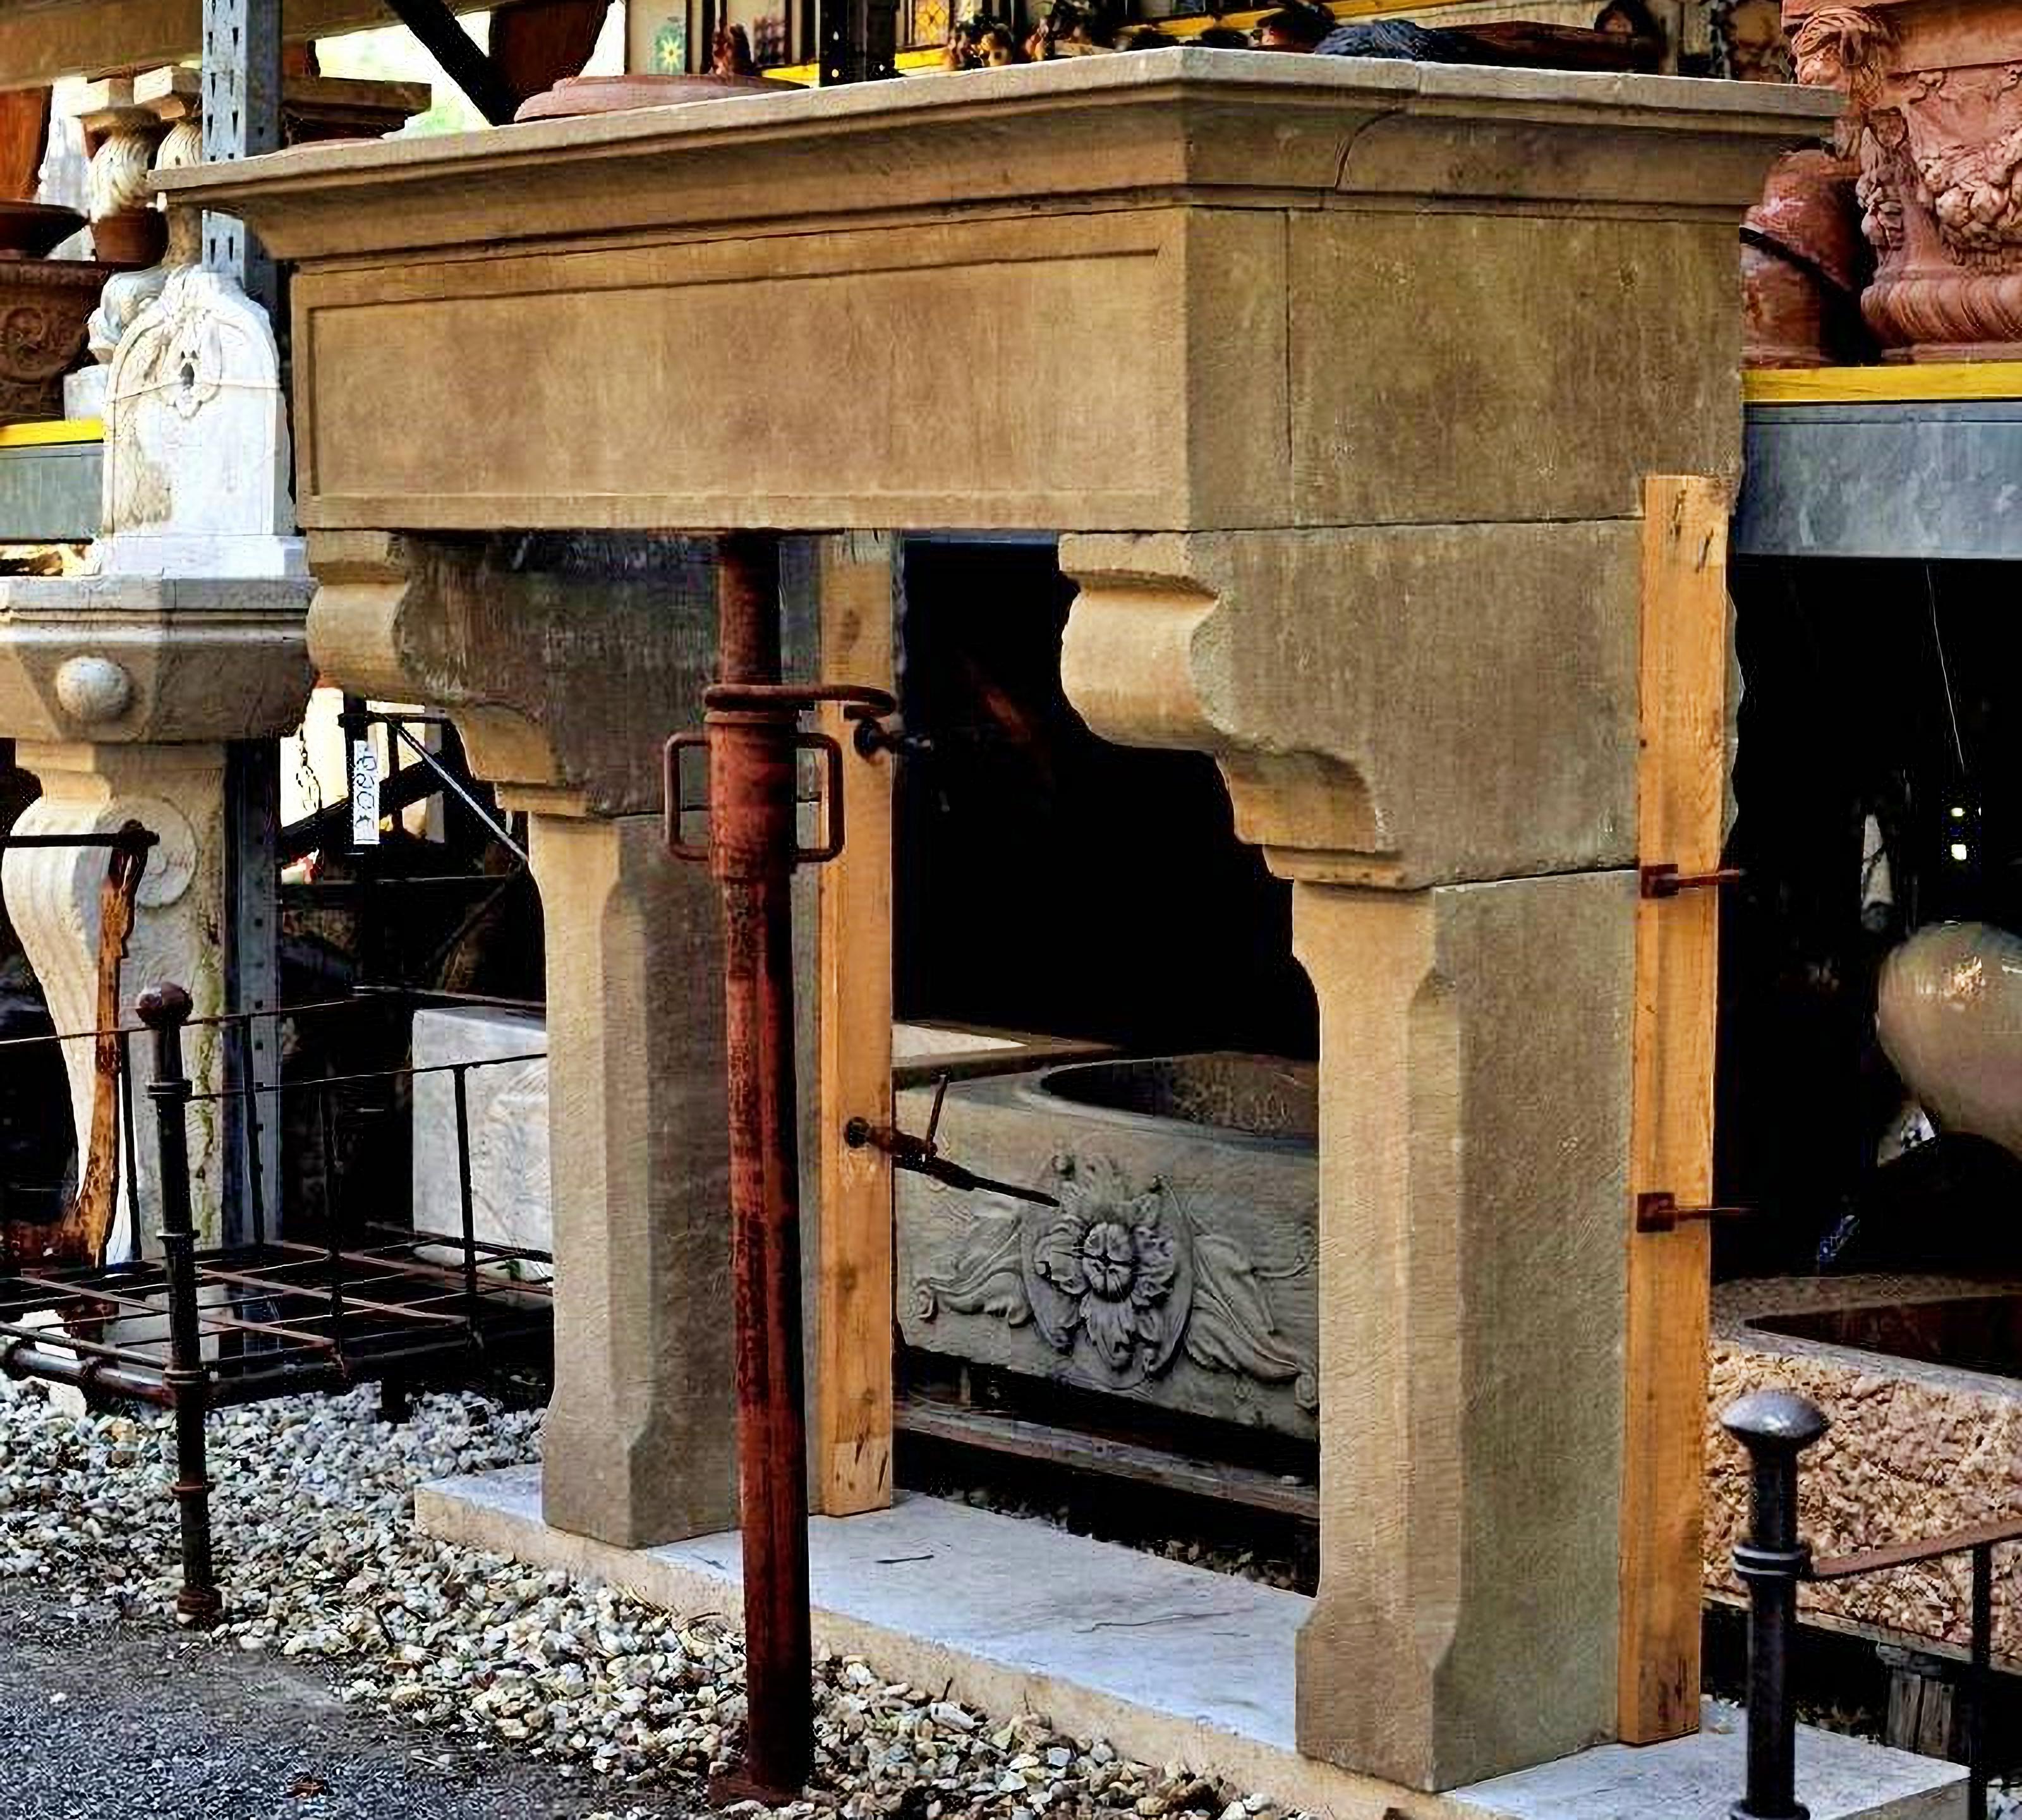 FIREPLACE IN SERENA STONE early 20th century
Italy
HEIGHT 130 cm
WIDTH 140 cm
DEPTH 70 cm
WEIGHT 340 Kg
FIRE MOUTH WIDTH BY HEIGHT 90 X 96 cm
MATERIAL Sand-stone